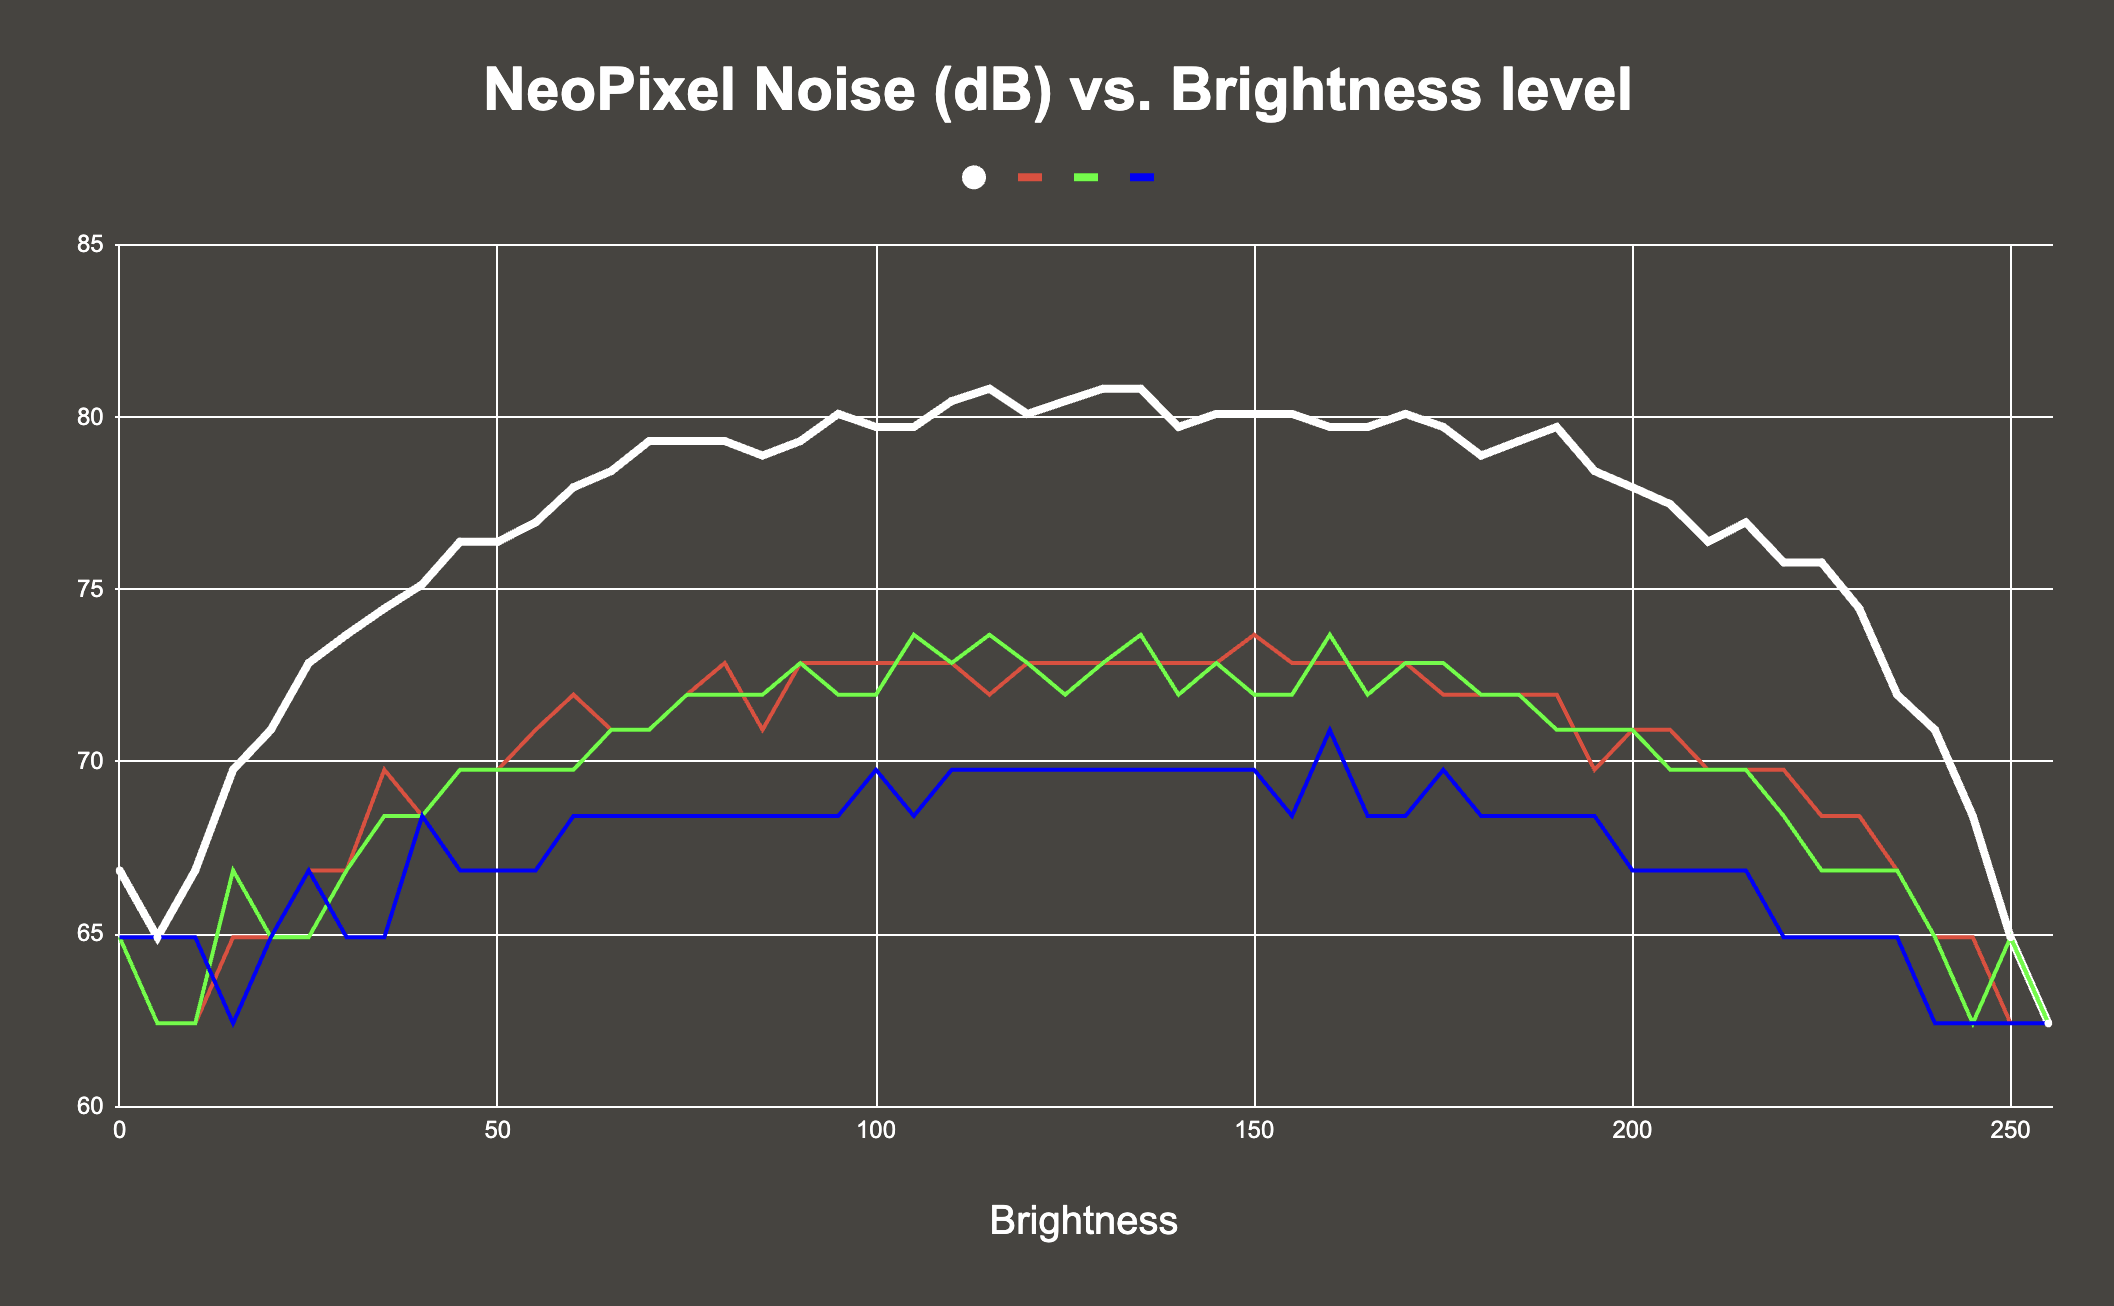 Graph of NeoPixel noise in dB as brightness increases